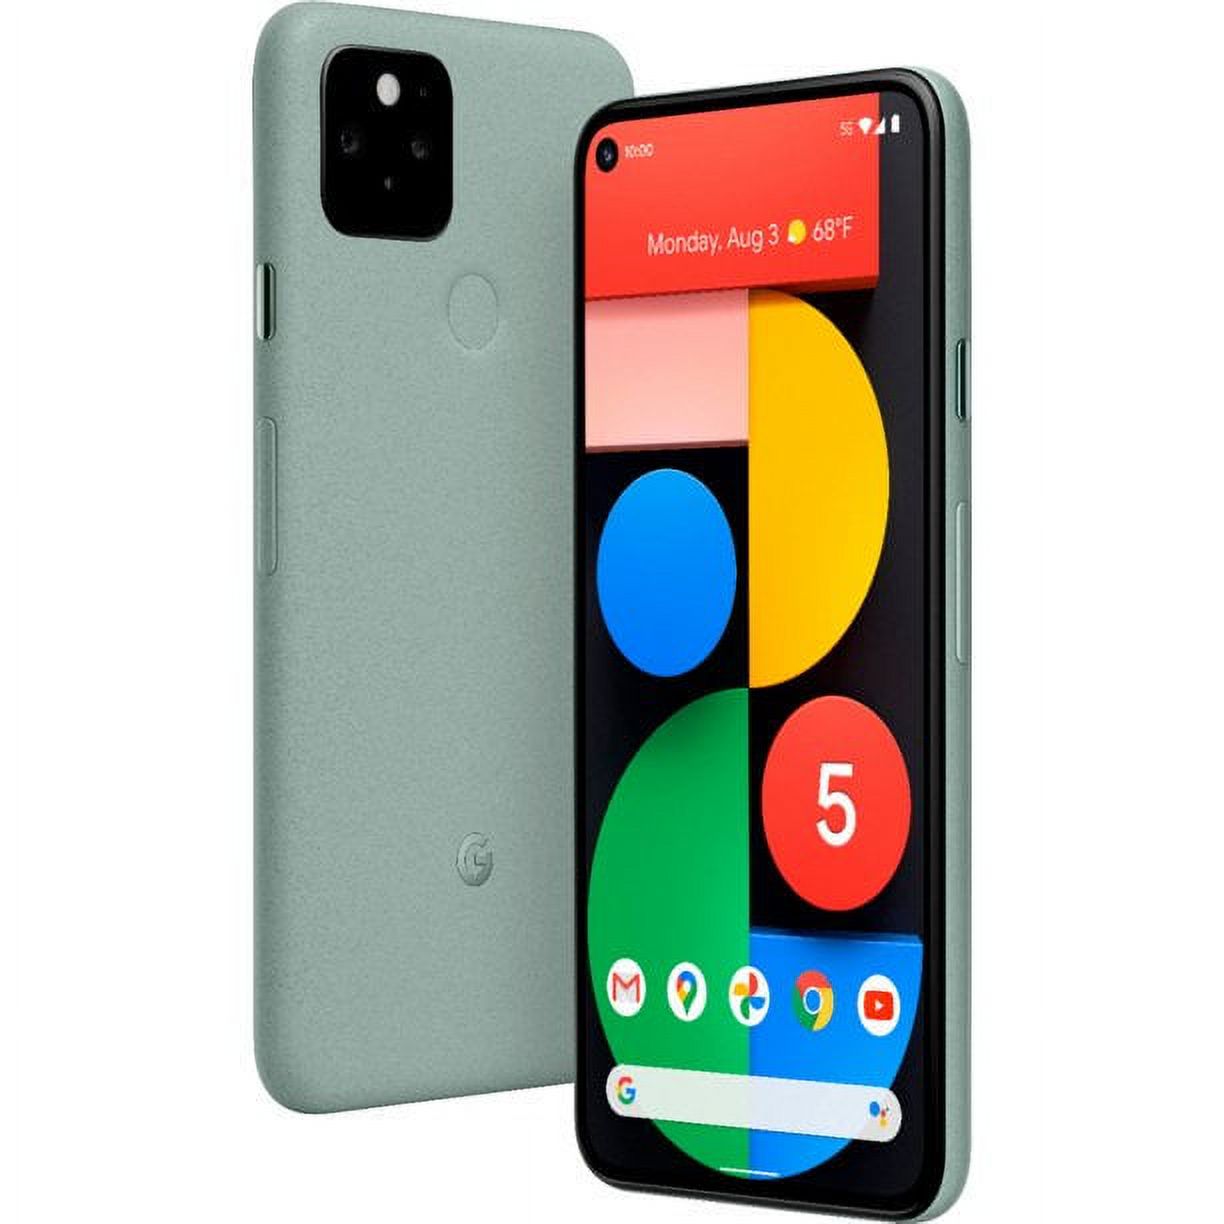 Pre-Owned Google Pixel 5, Fully Unlocked 128GB, Green, 6.0 in (Refurbished: Good) - image 1 of 4